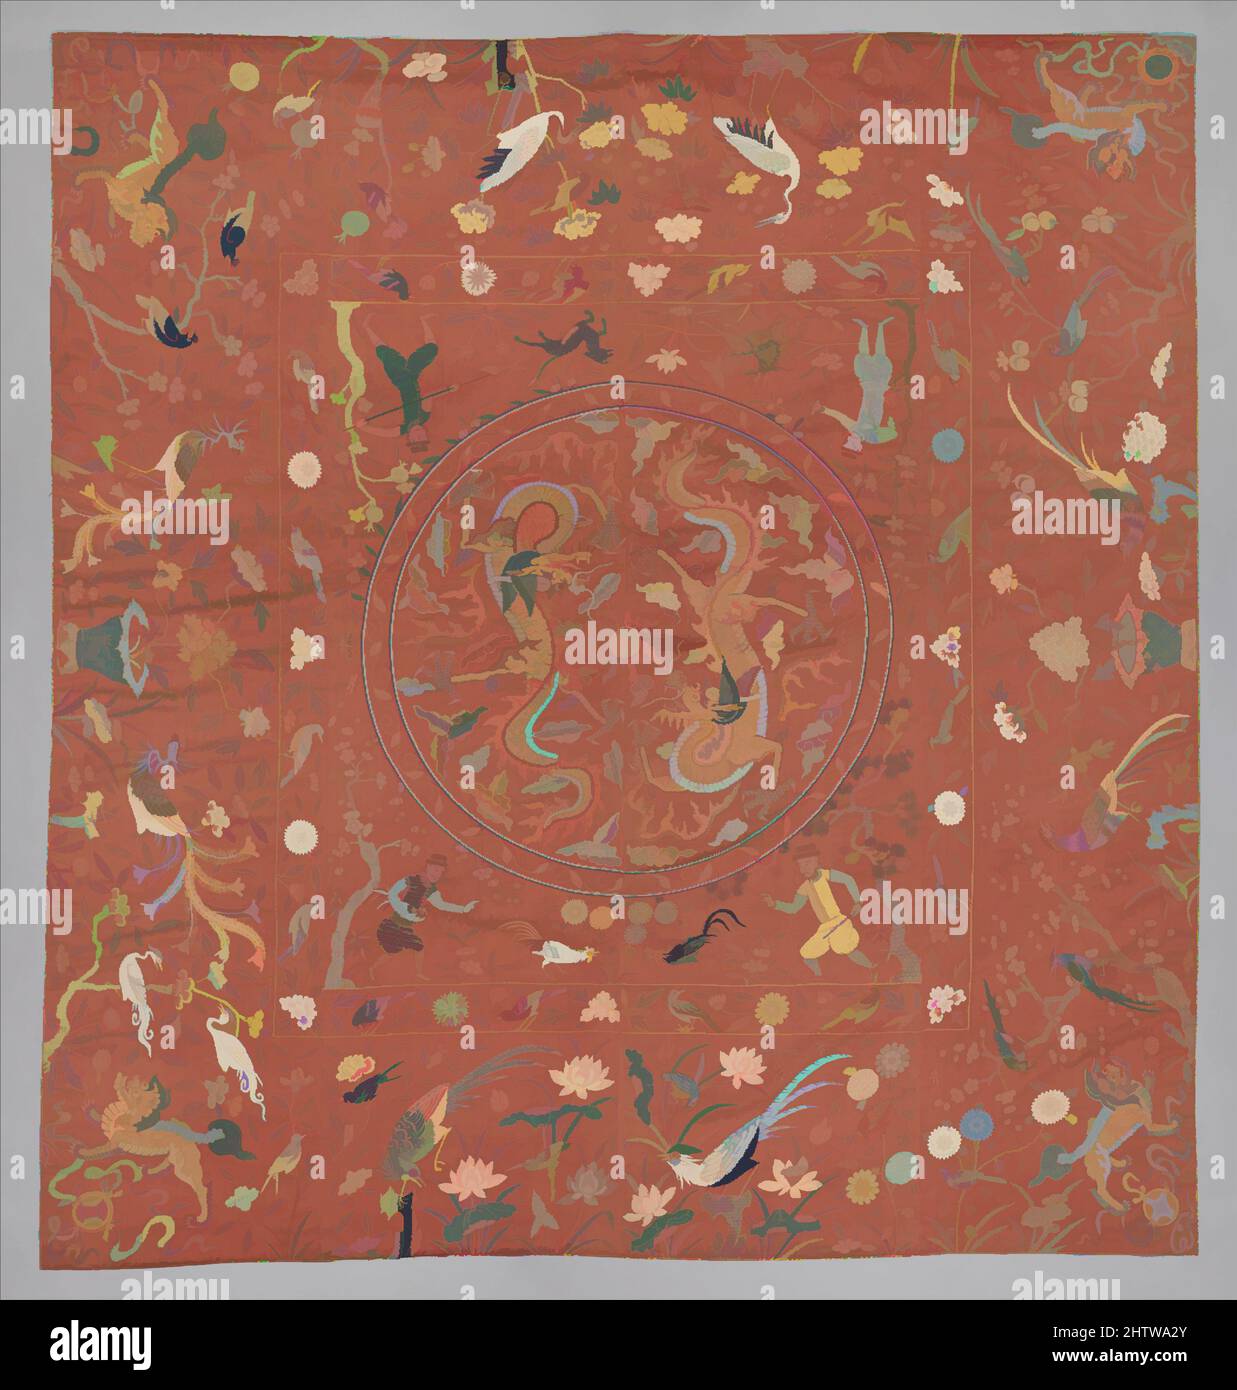 Art inspired by Coverlet, 17th century, Chinese, for the European market, Silk satin, embroidered with silk and gilt-paper-wrapped thread, H. 84 x W. 79 inches (213.4 x 200.7 cm), Textiles-Embroidered, This Chinese coverlet reflects the novelty that comes from artistic exchange. The, Classic works modernized by Artotop with a splash of modernity. Shapes, color and value, eye-catching visual impact on art. Emotions through freedom of artworks in a contemporary way. A timeless message pursuing a wildly creative new direction. Artists turning to the digital medium and creating the Artotop NFT Stock Photo